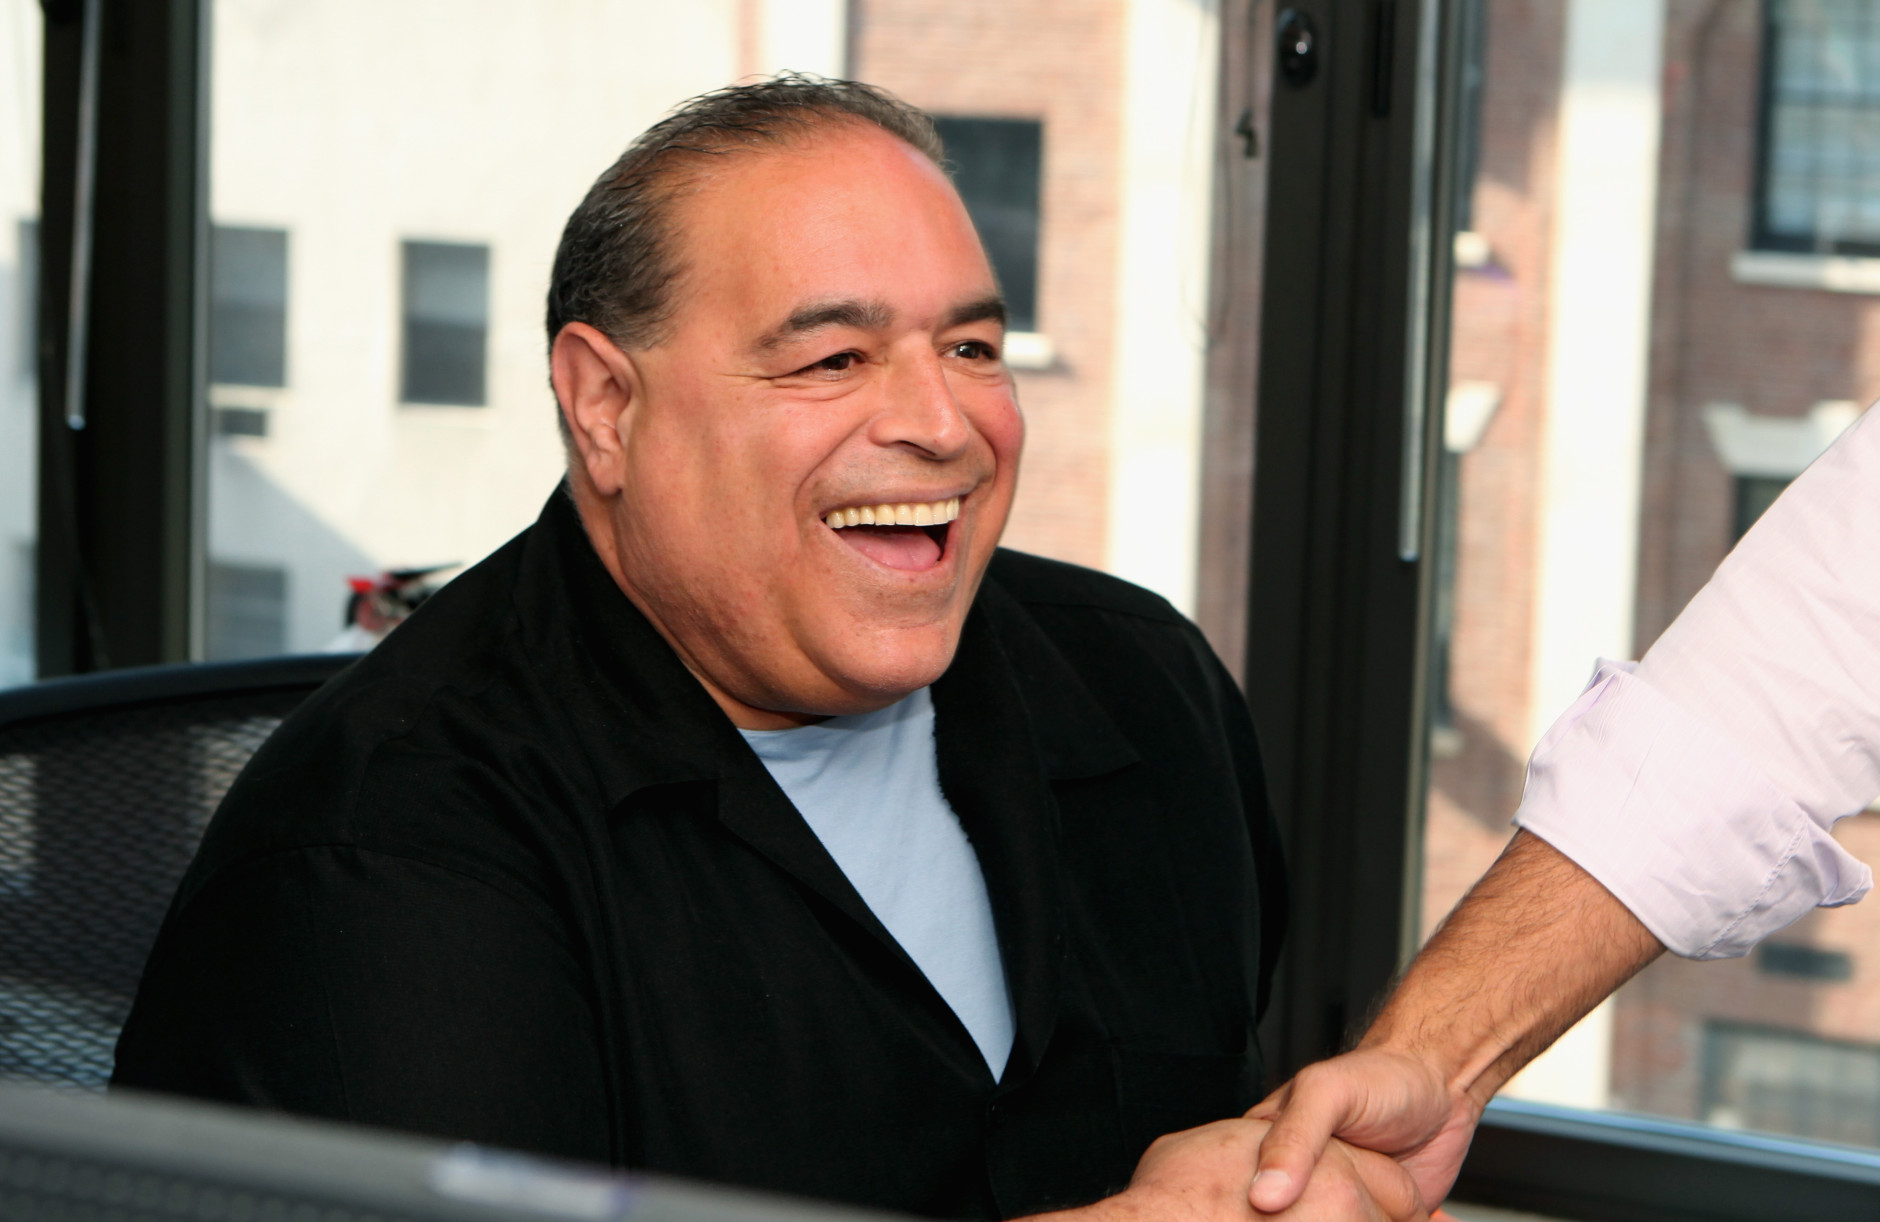 NEW YORK, NY - SEPTEMBER 11:  Actor Joe Gannascoli fundraises at the Annual Charity Day Hosted By Cantor Fitzgerald And BGC at the Cantor Fitzgerald Office on September 11, 2013 in New York, United States.  (Photo by Jeff Schear/Getty Images for Cantor Fitzgerald)